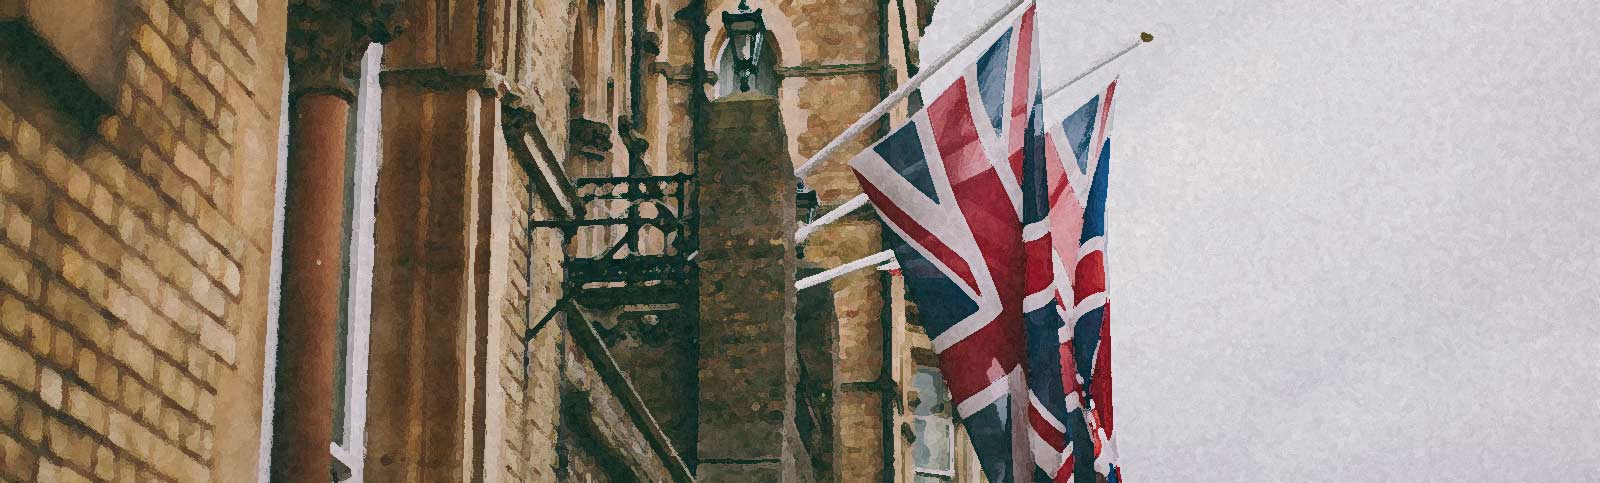  Is Brexit Priced Into Current Property Prices in the UK?